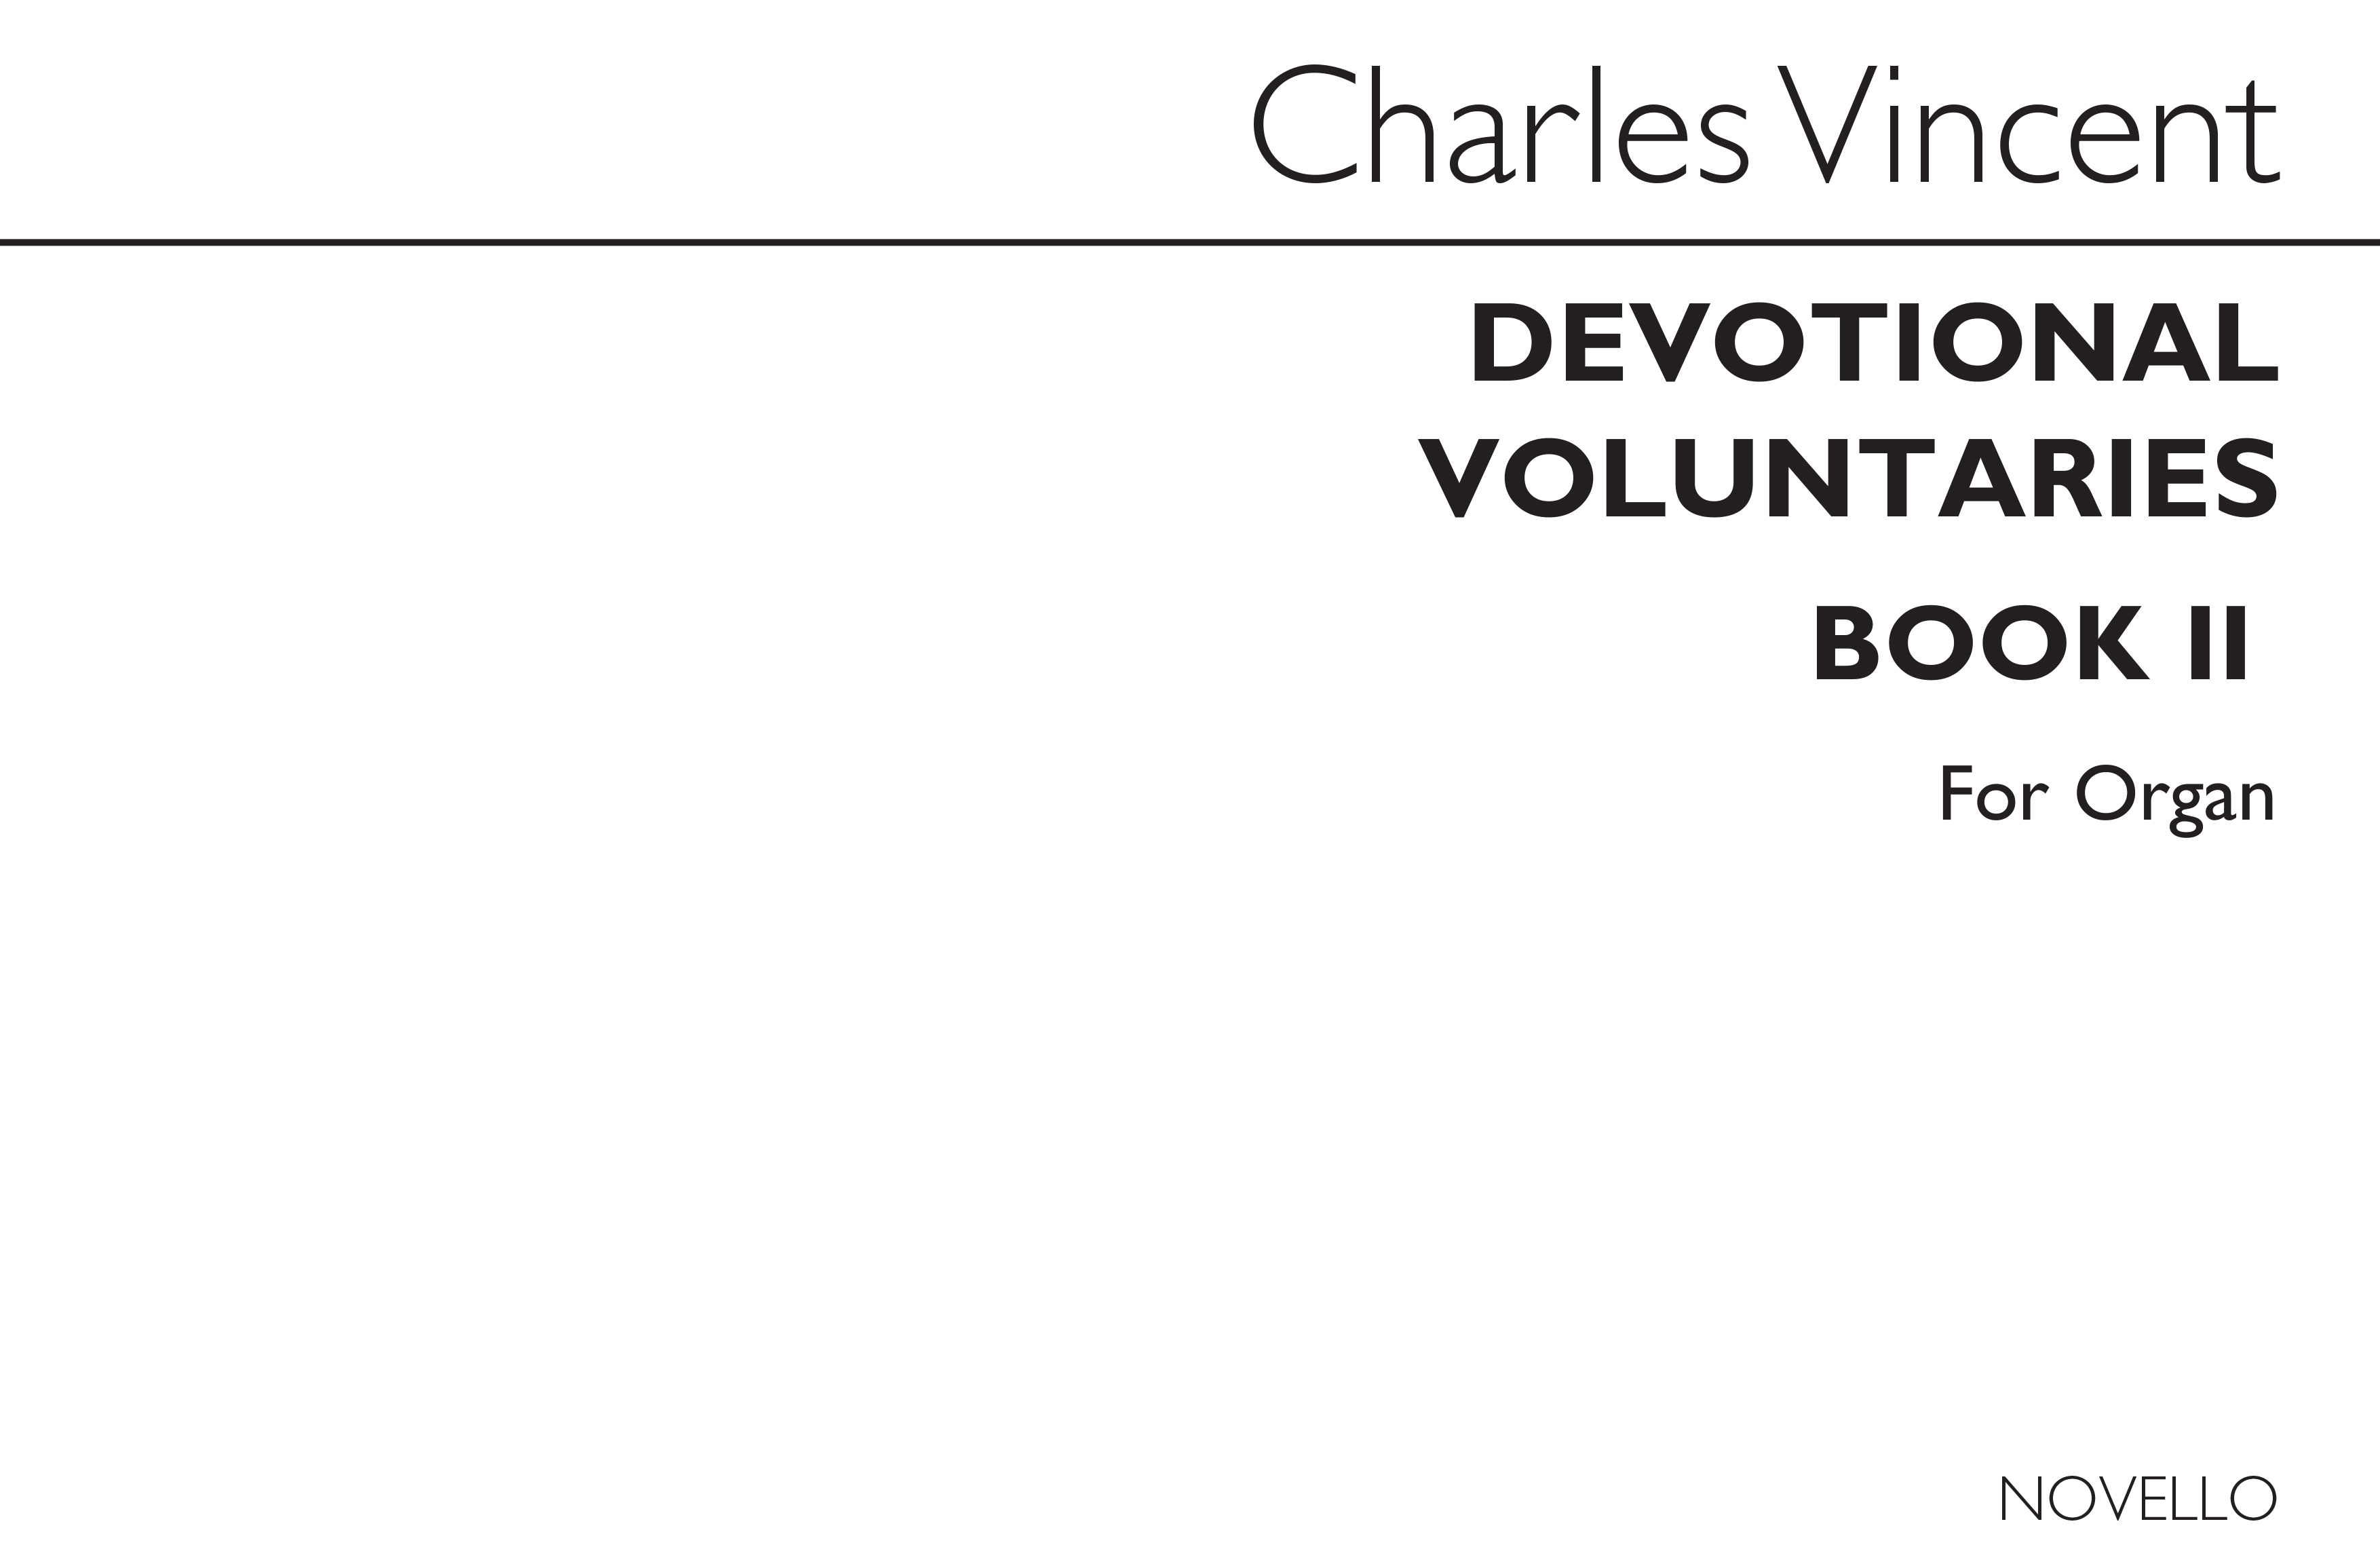 Vincent, C Devotional Voluntaries Book 2 For Organ (Three Stave)